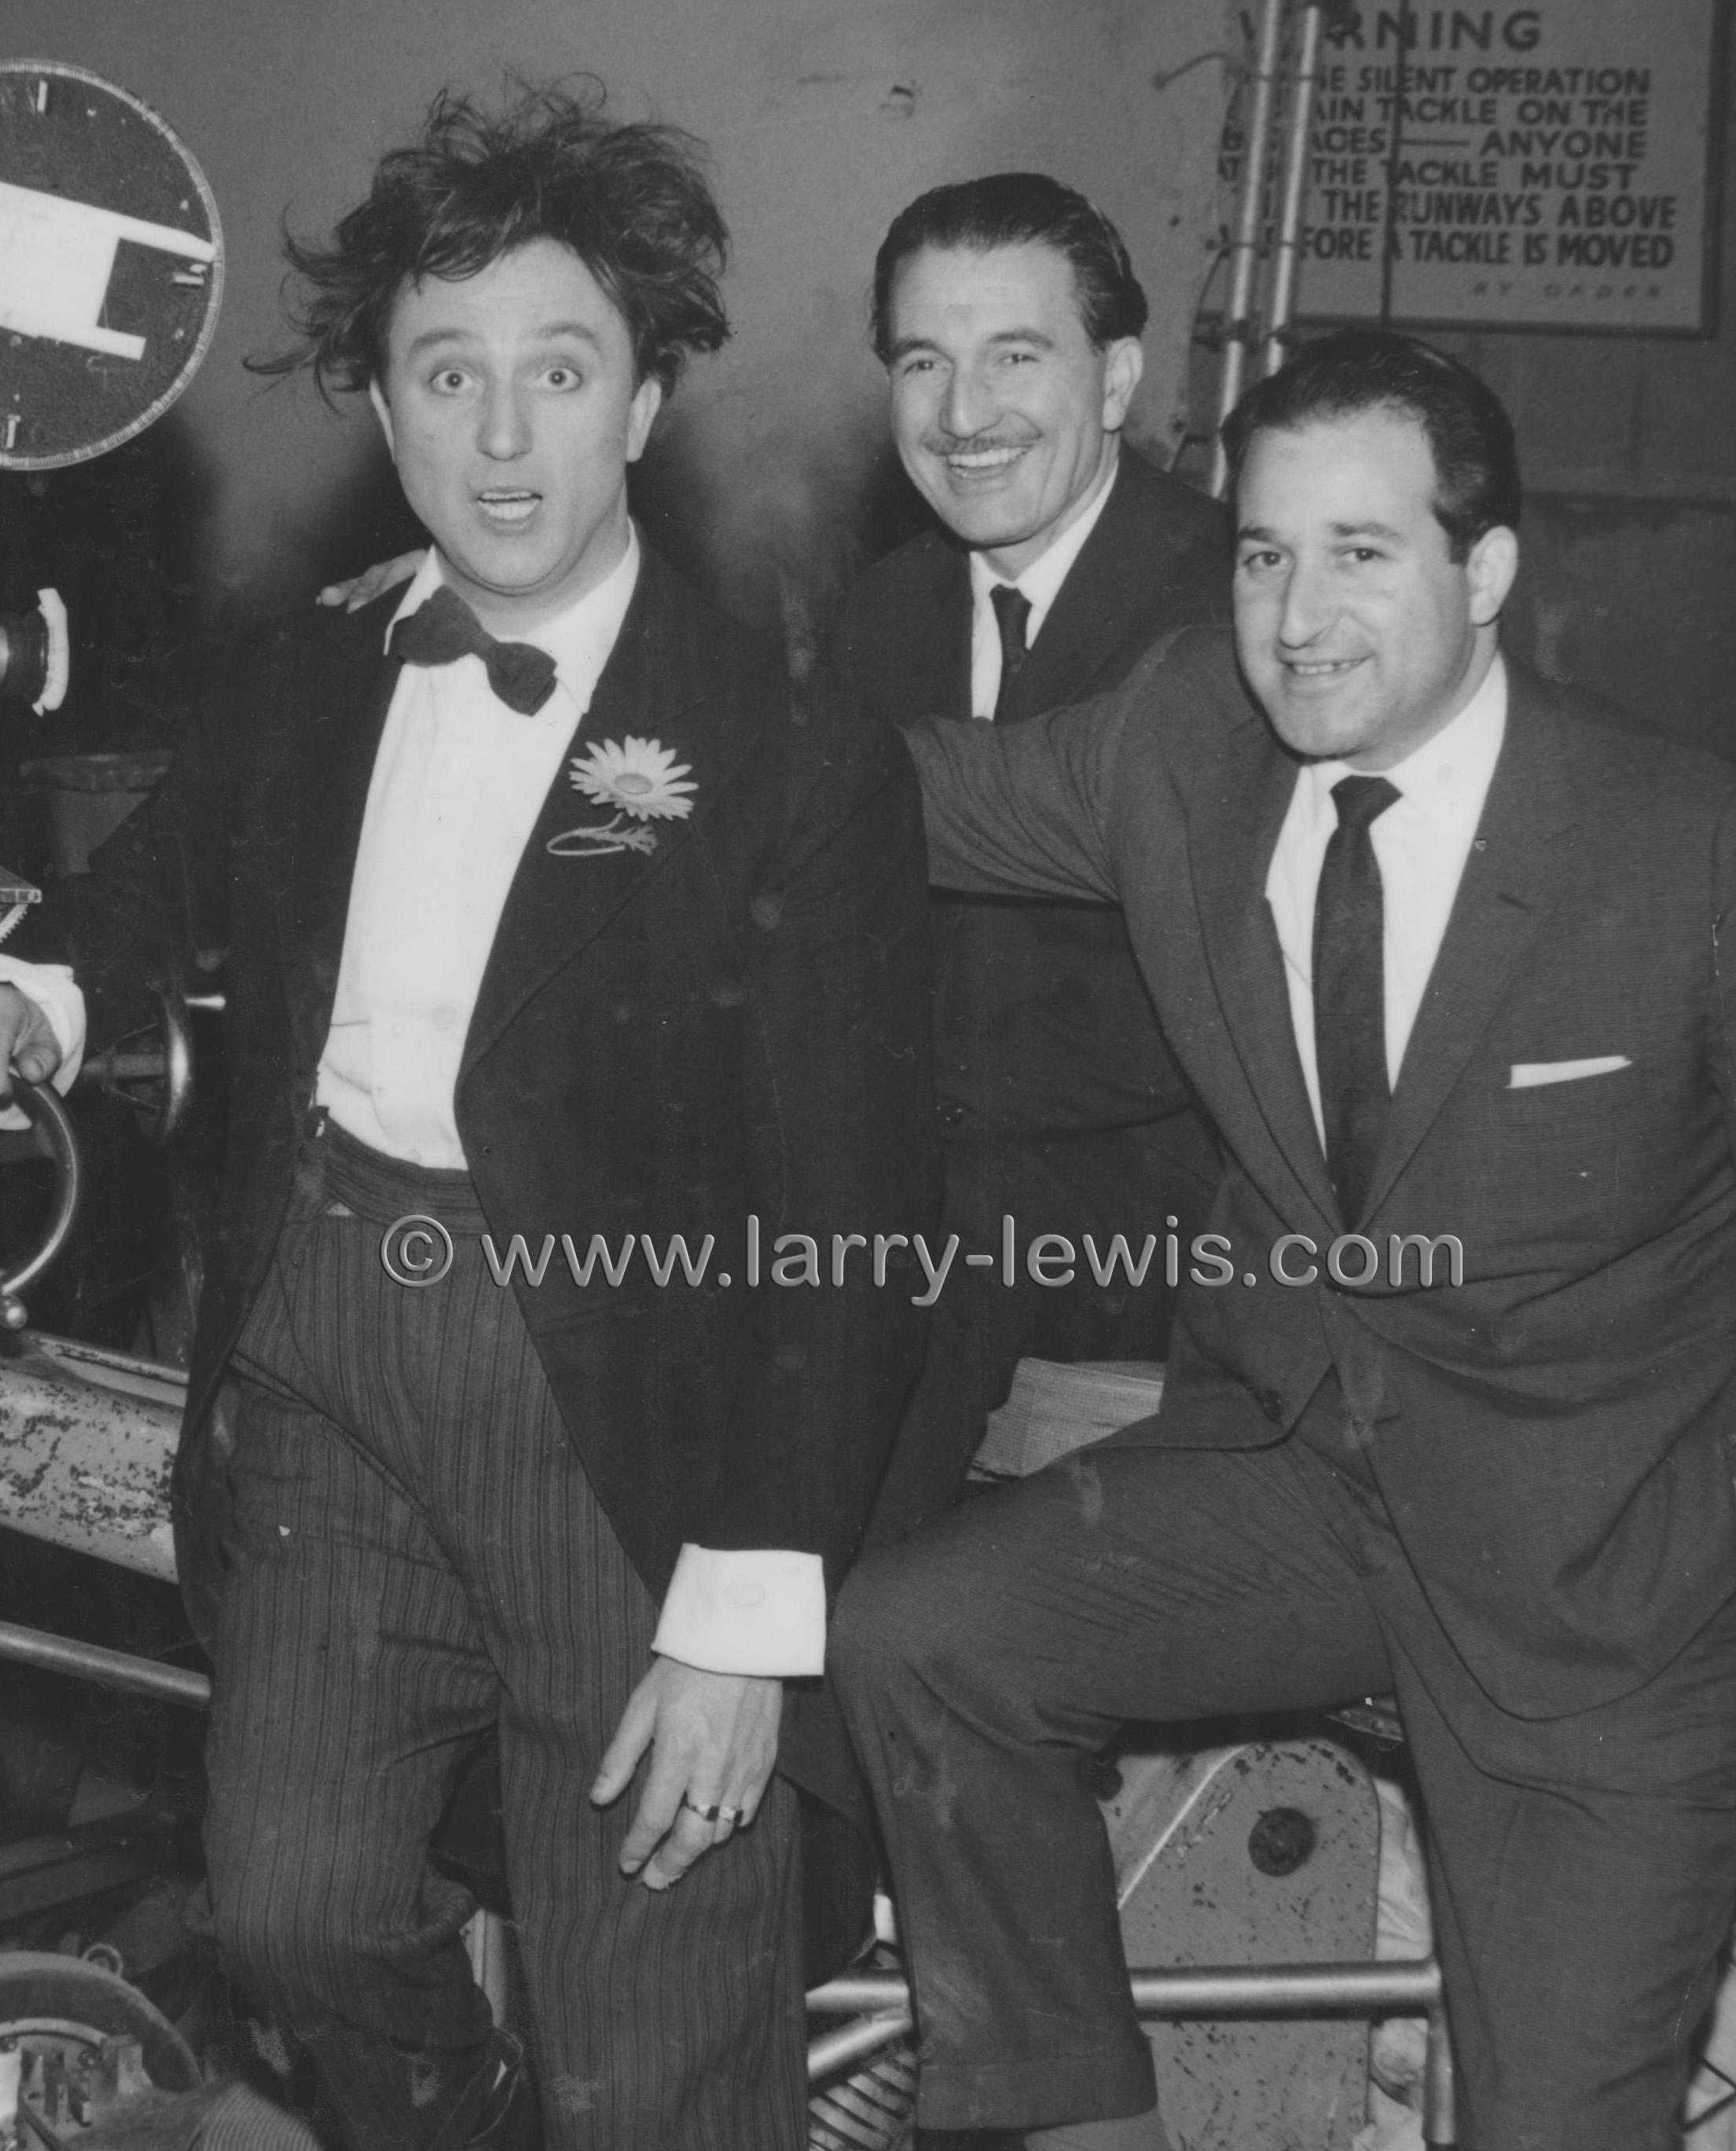 Rare Pearl and Dean Photo of My Dad and Ken Dodd